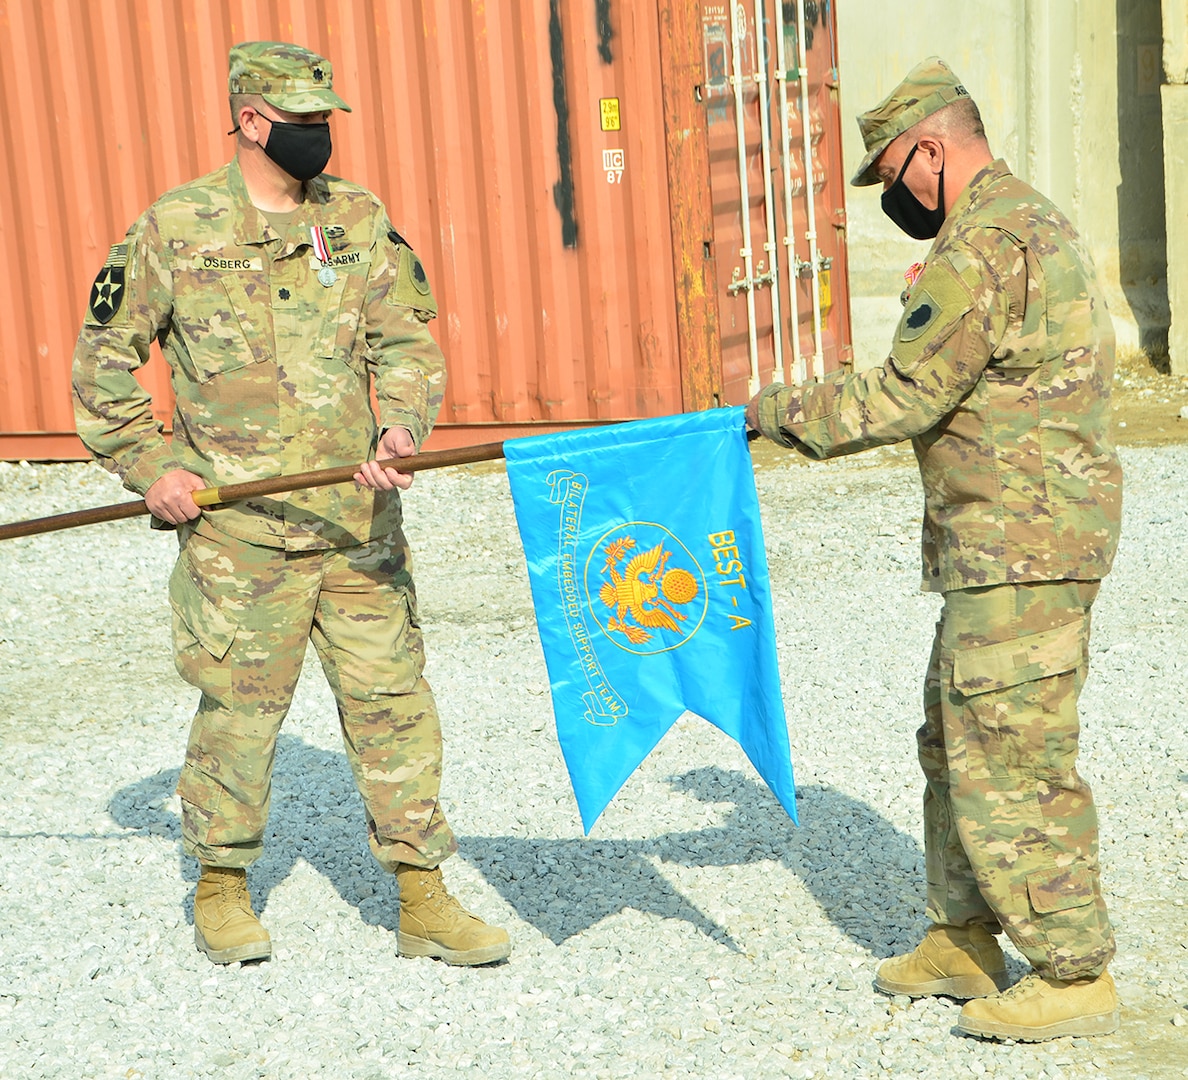 Lt. Col. Jason Osberg, of Champaign, Illinois, Commander Bilateral Embedded Support Team A25, and Master Sgt. Adam Abdul, of Collinsville, Illinois, prepare to case the BEST A colors during the decommissioning ceremony at Bagram Airfield, Afghanistan.